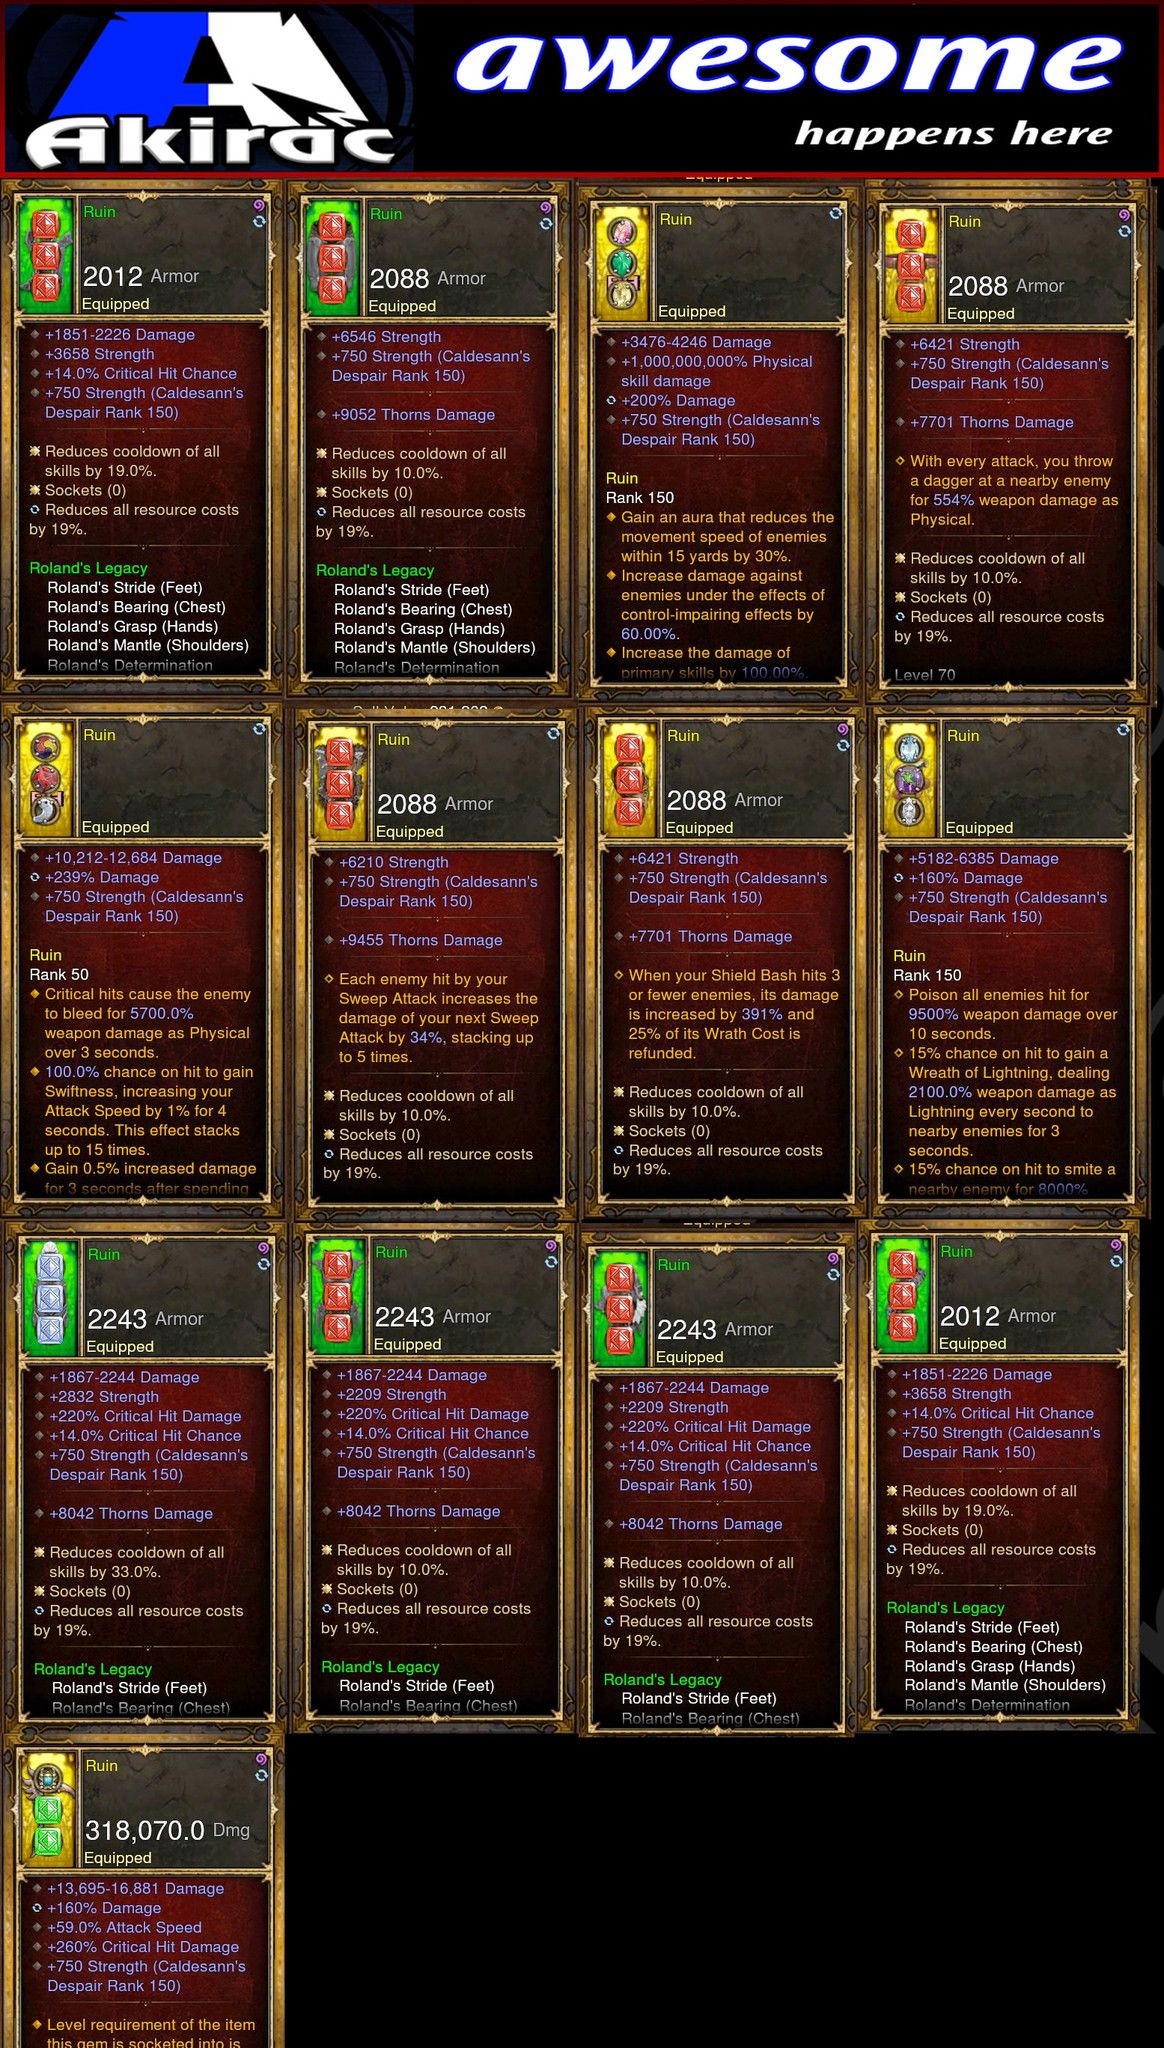 Diablo 3 Immortal v3 Rolands Crusader Modded Set for Rift 150 Ruin Diablo 3 Mods ROS Seasonal and Non Seasonal Save Mod - Modded Items and Gear - Hacks - Cheats - Trainers for Playstation 4 - Playstation 5 - Nintendo Switch - Xbox One